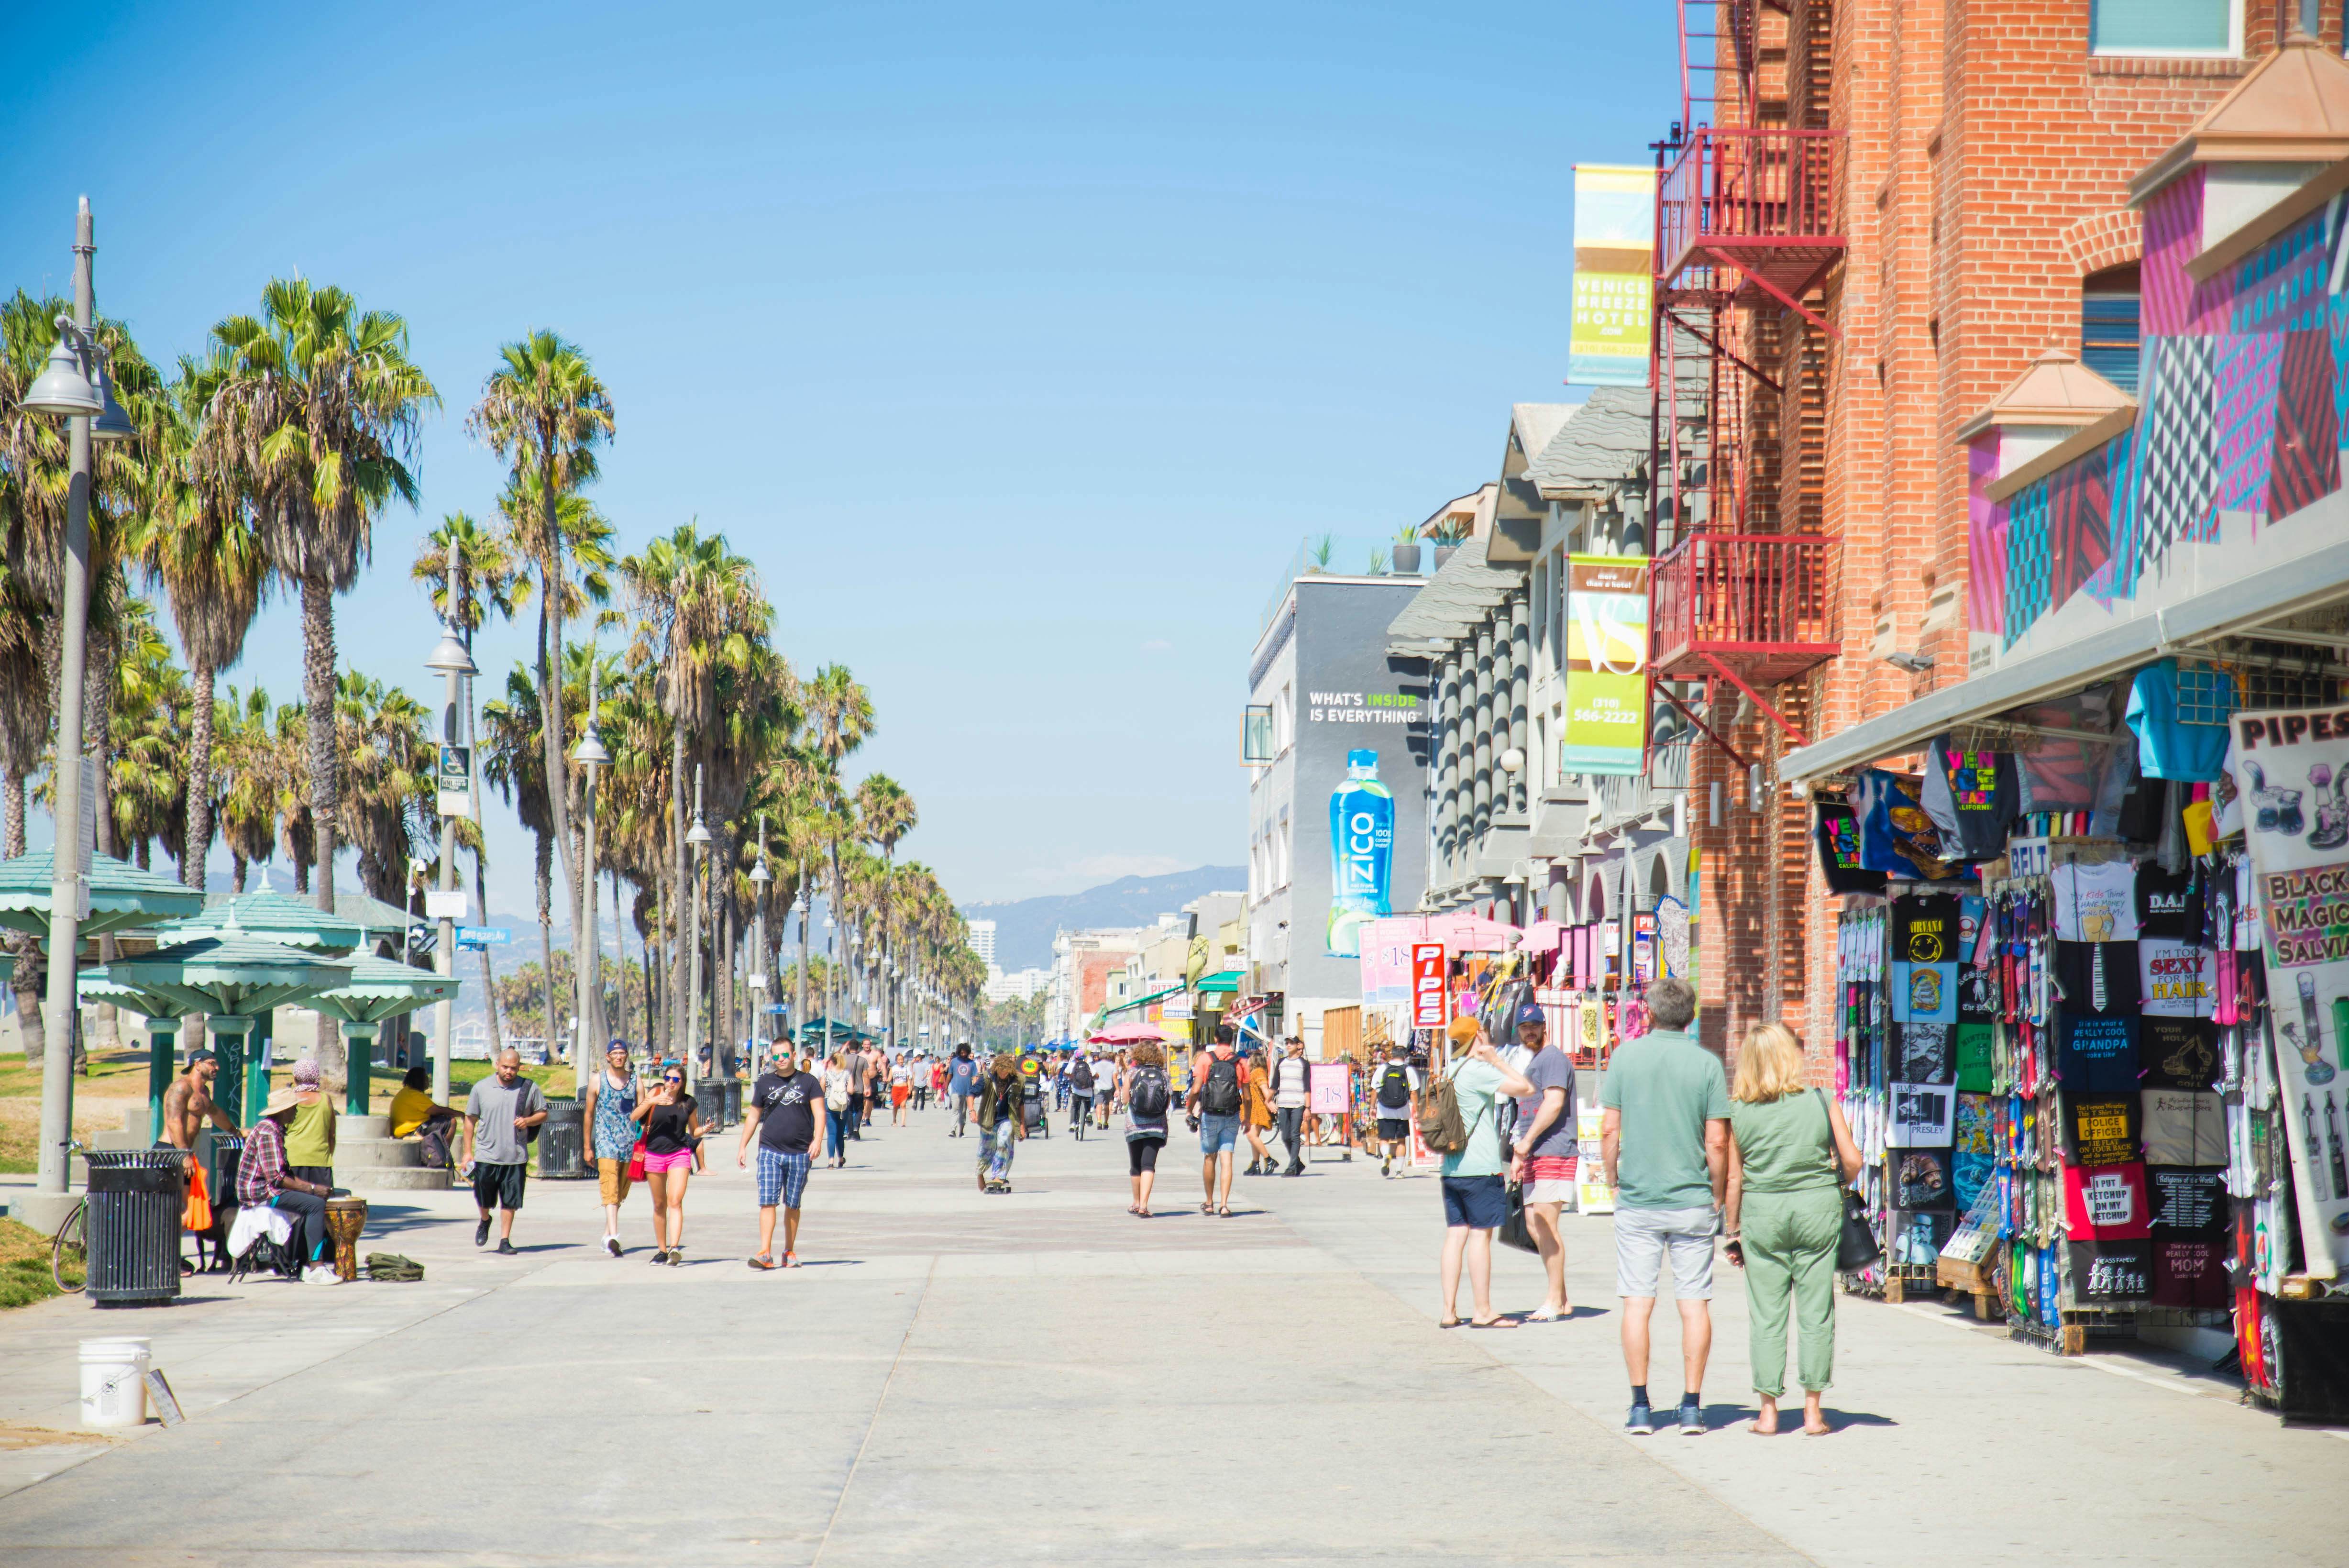 Visiting Los Angeles: 9 Things You Should Know Before Your Trip